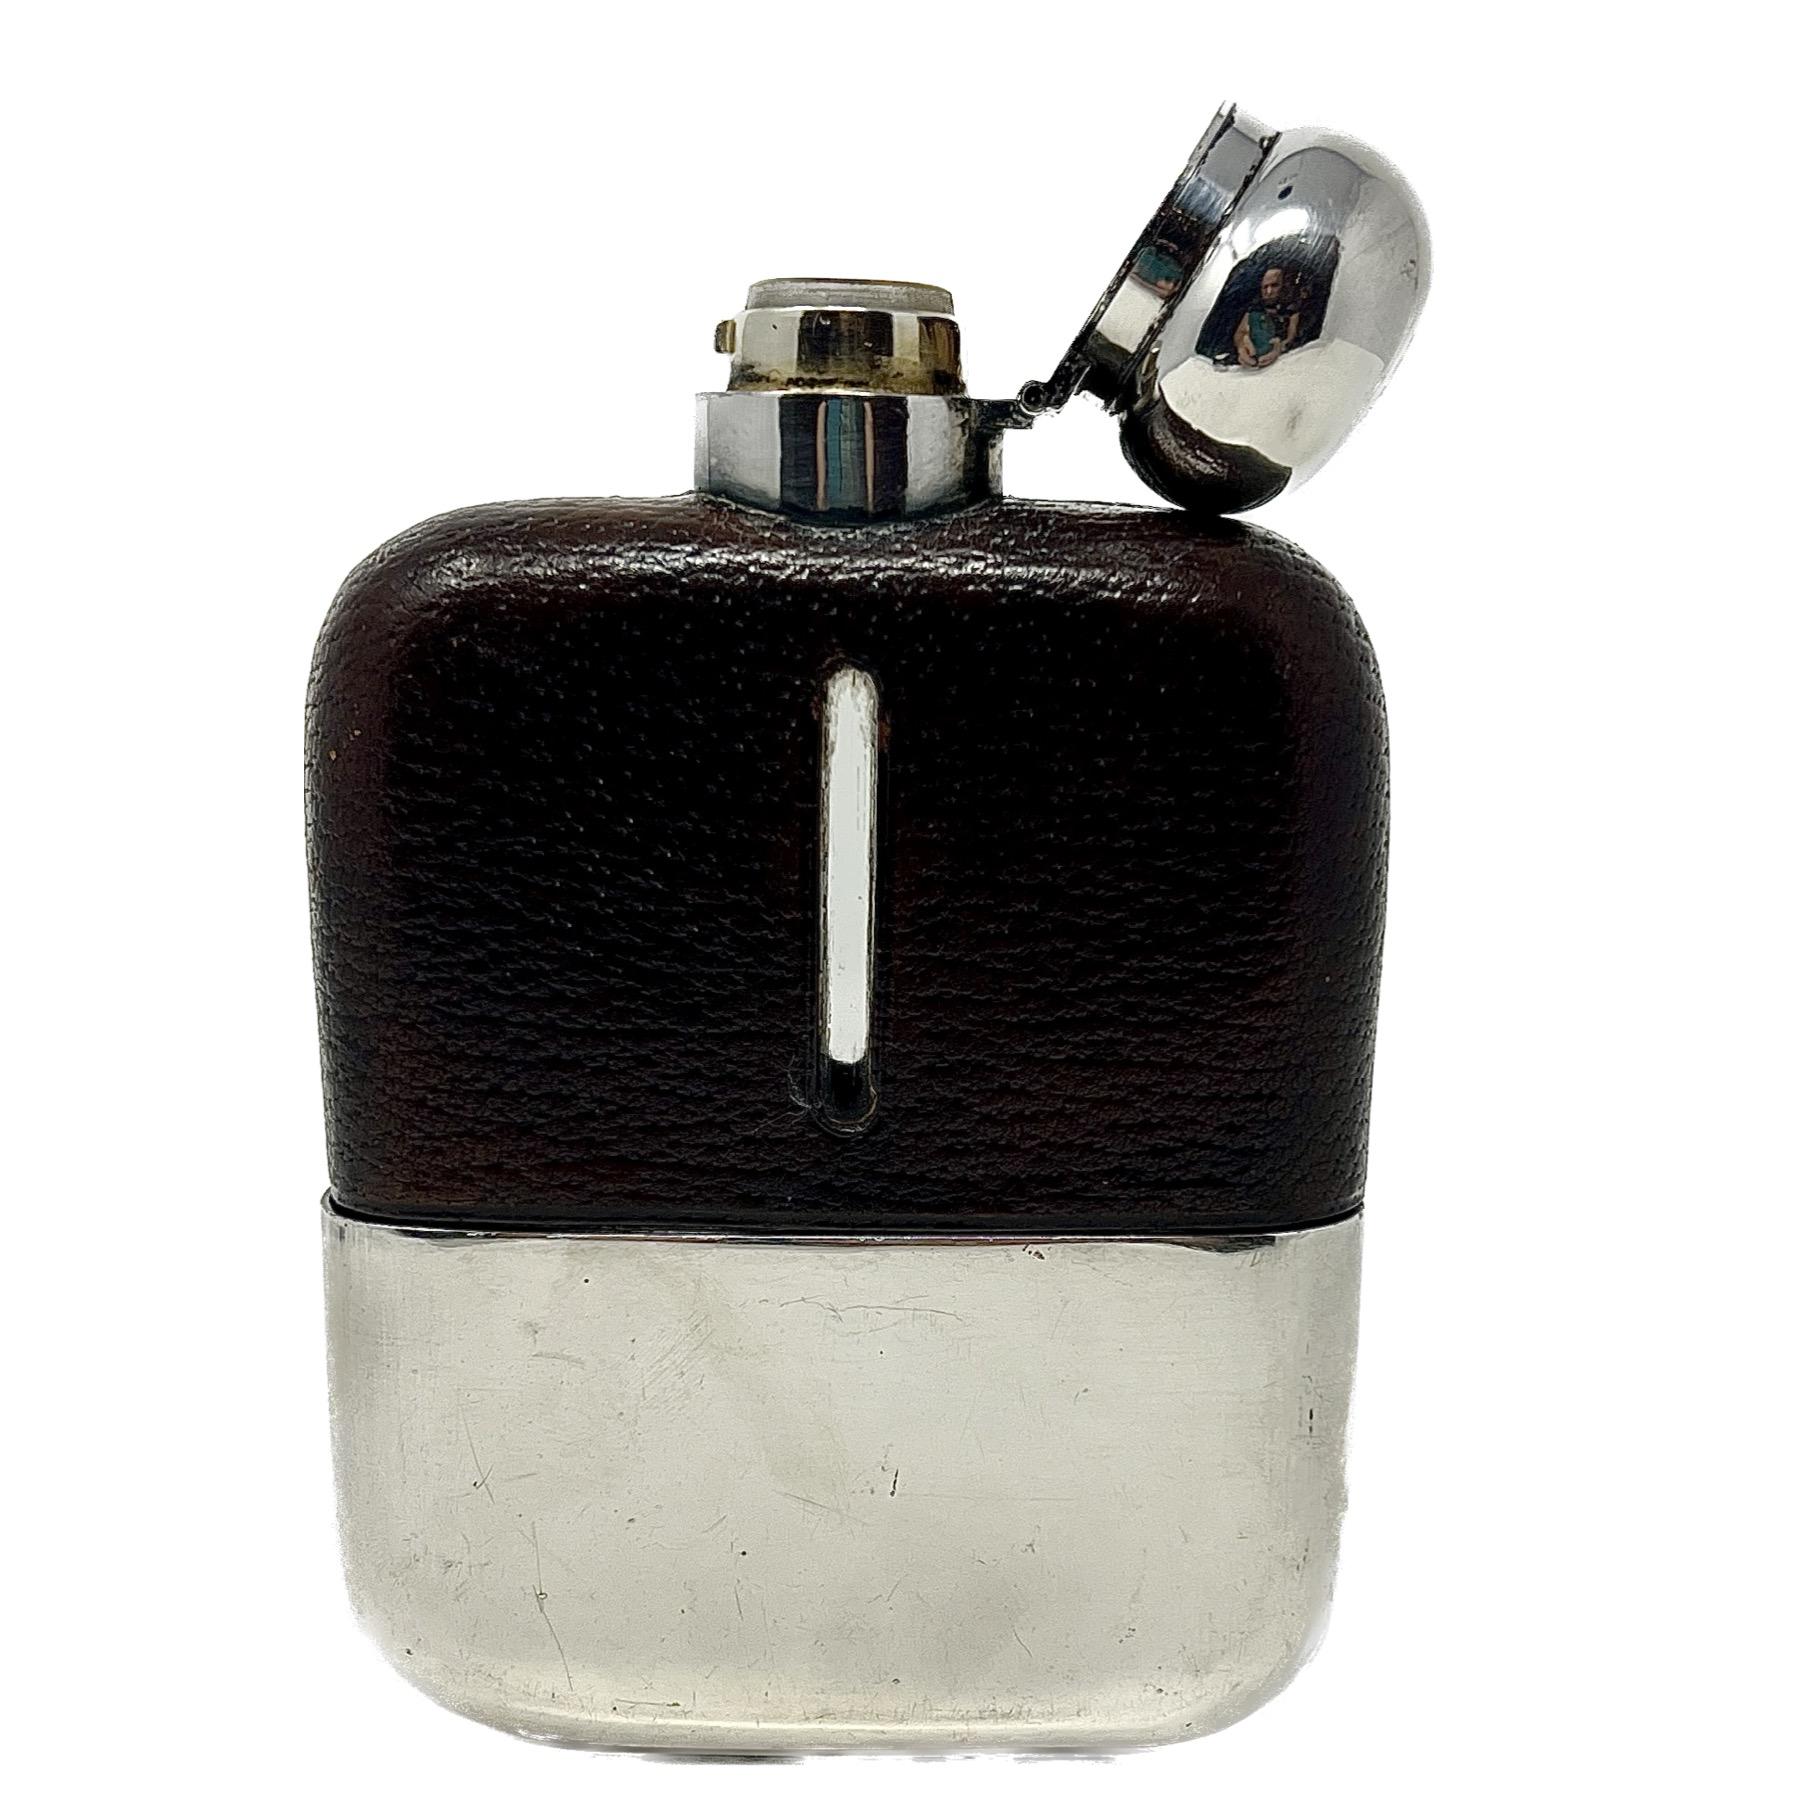 Antique English Silver Plate and Italian Leather Mounted Flask, Circa 1920.
Hallmarked 